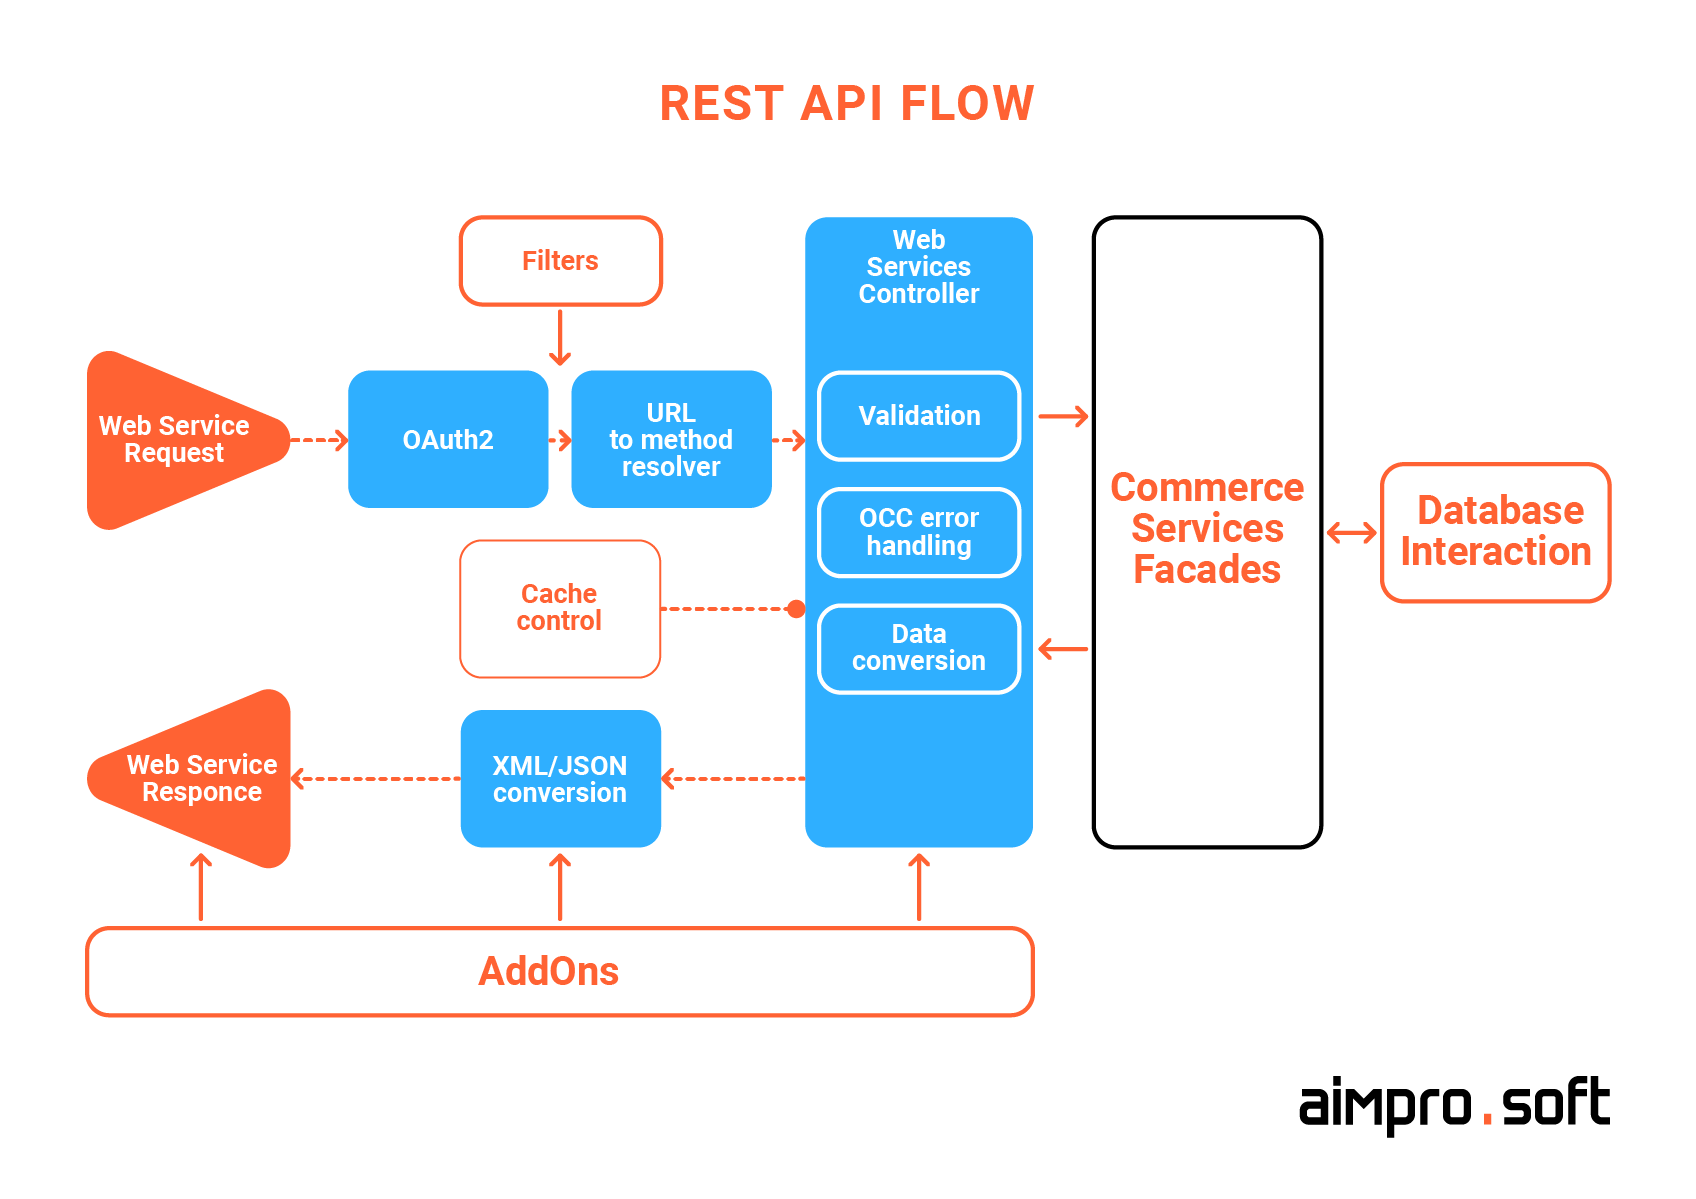 A REST API flow typical for SAP Hybris projects